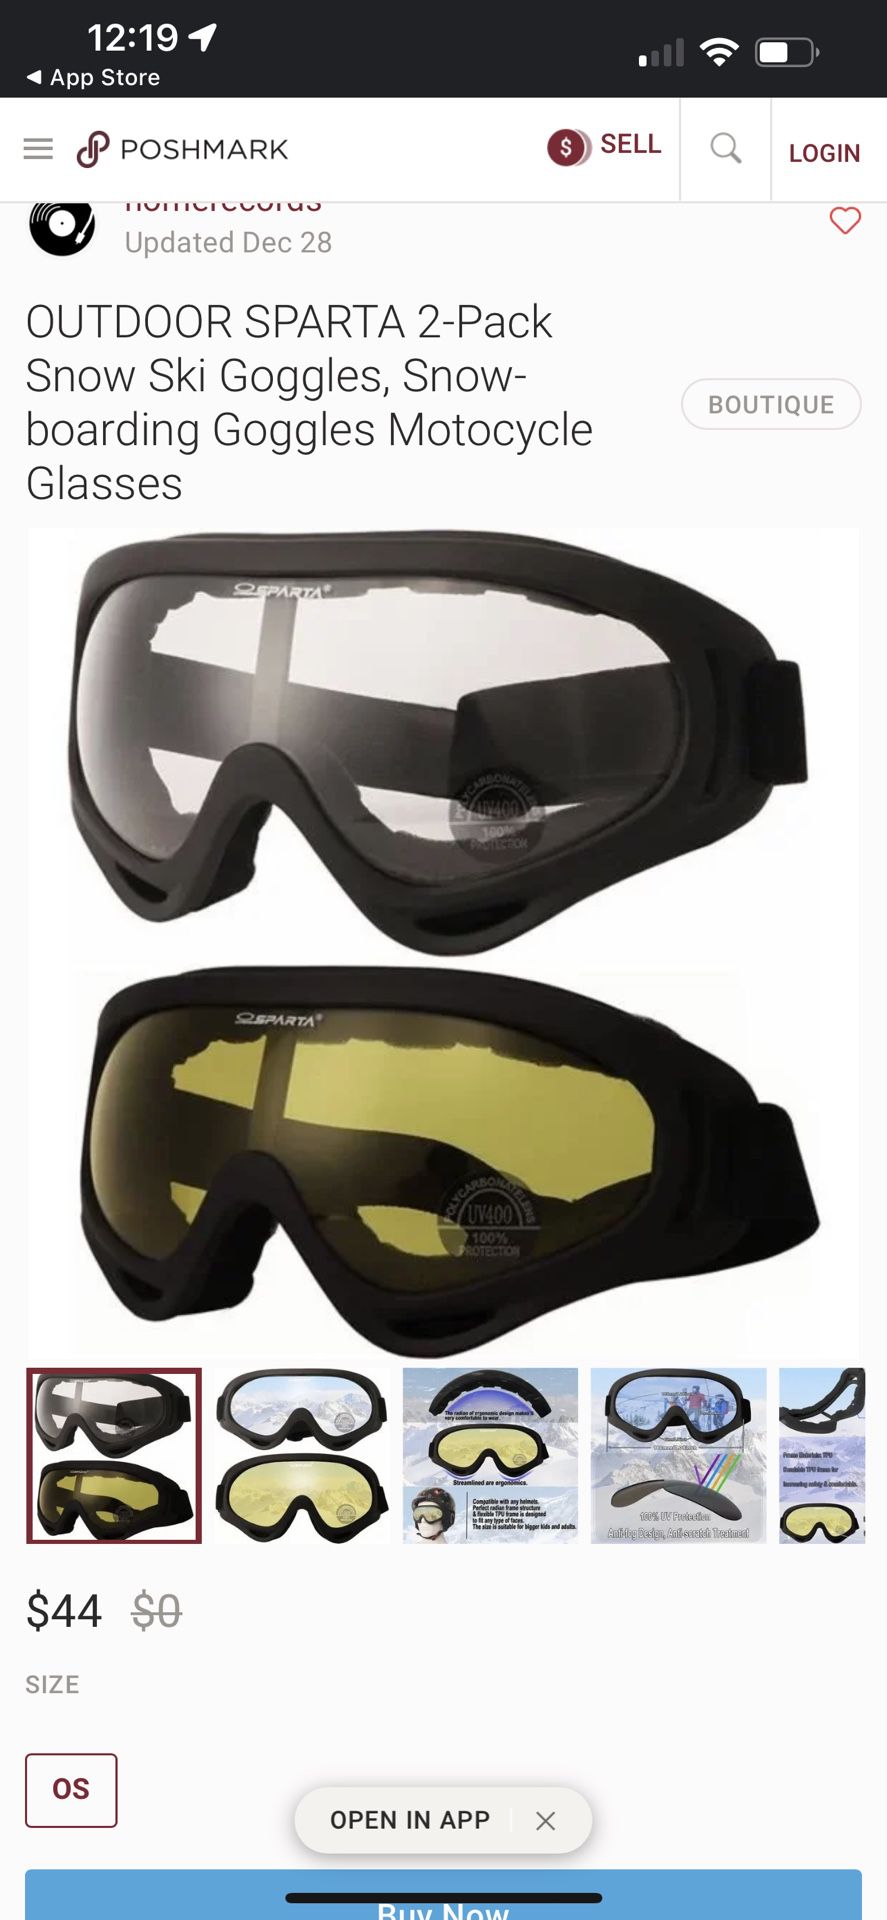 Outdoor Sparta 2-Pack Snow Ski Goggles, Snowboarding Goggles Motorcycle Glasses 